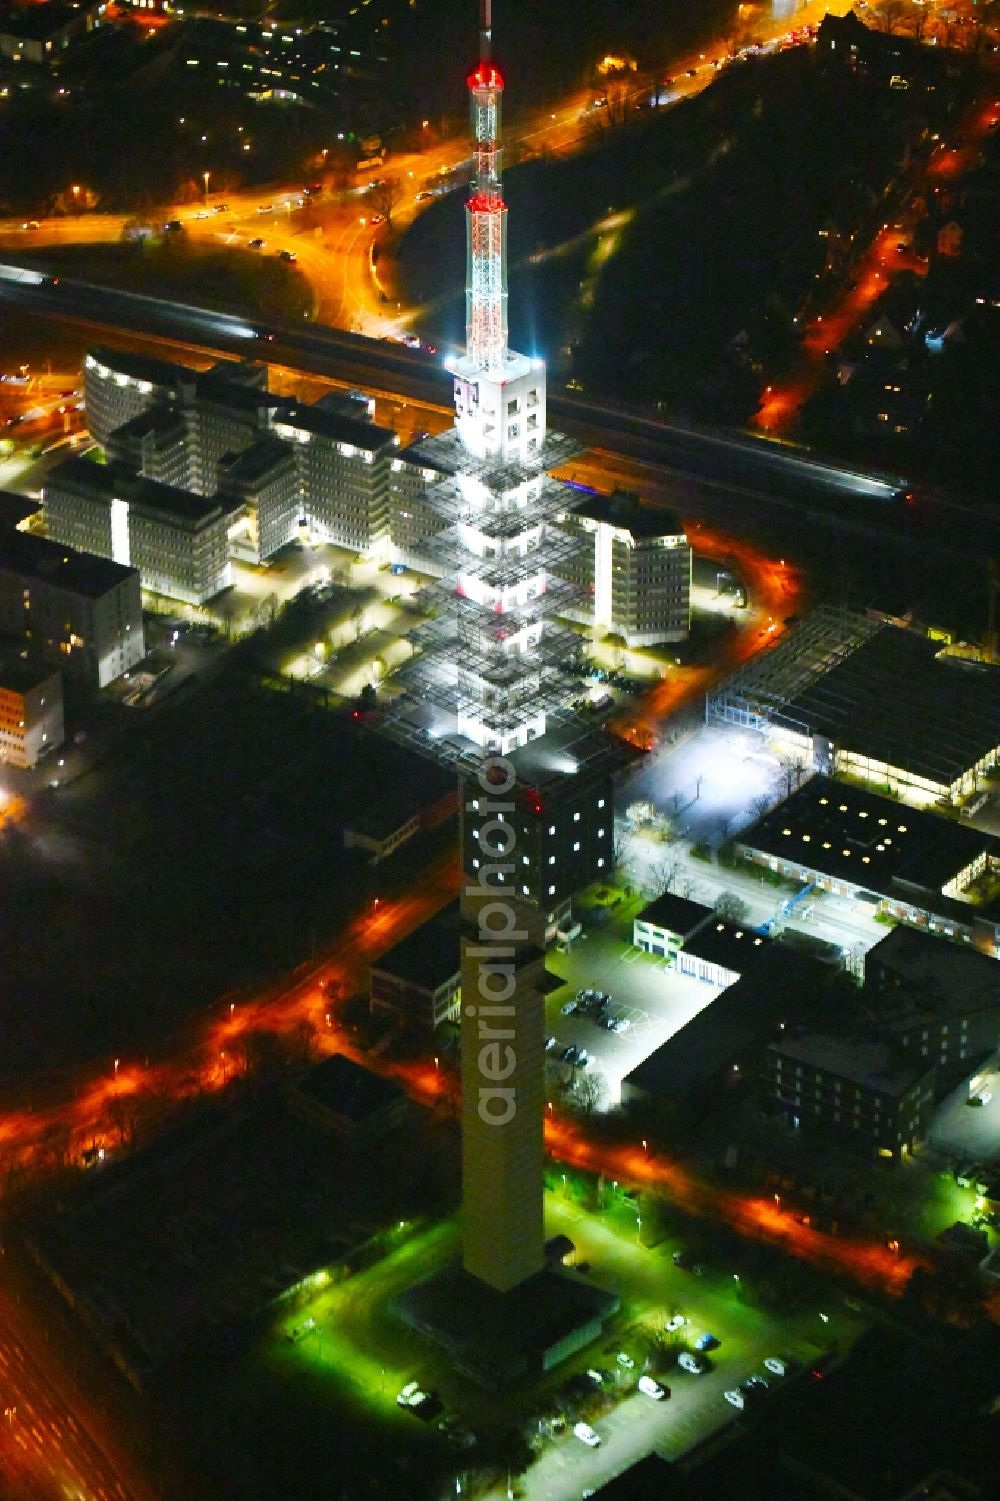 Aerial image at night Hannover - Night lighting Television Tower of DFMG Deutsche Funkturm GmbH on Neue-Land-Strasse in the district Buchholz-Kleefeld in Hannover in the state Lower Saxony, Germany